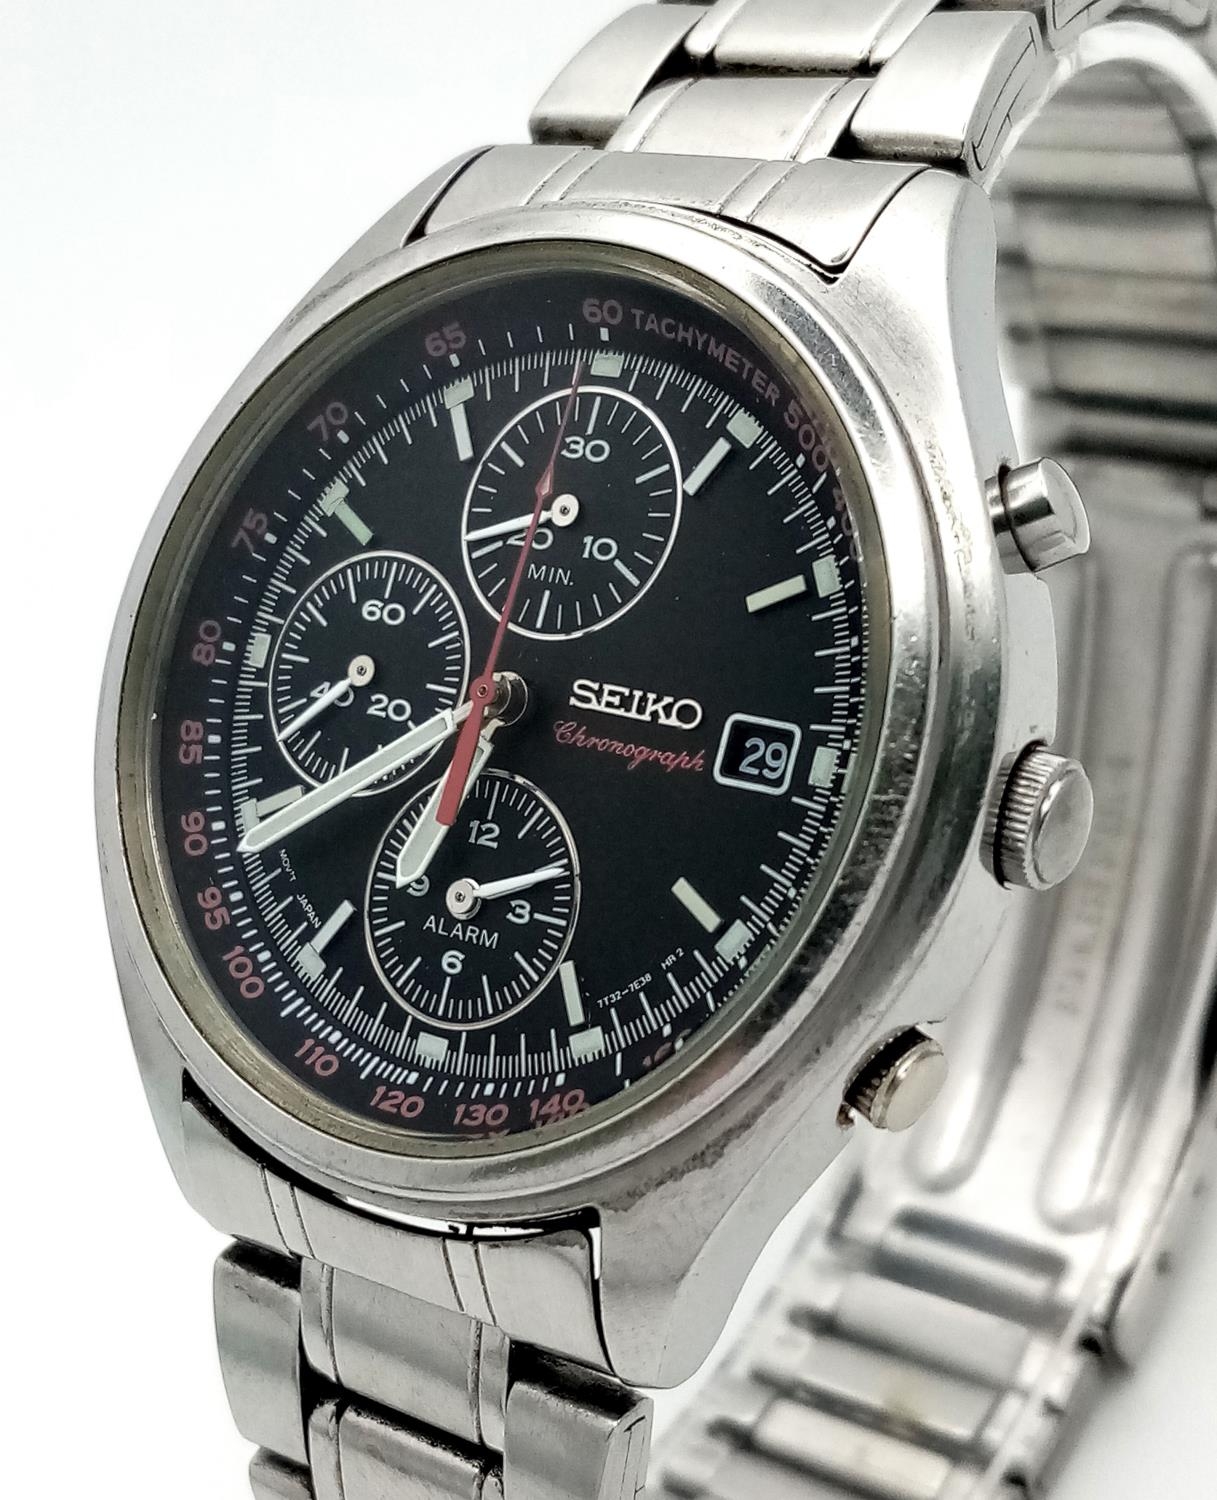 A Seiko Chronograph Quartz Alarm Gents Watch. Stainless steel bracelet and case - 38mm. Black dial - Image 4 of 7